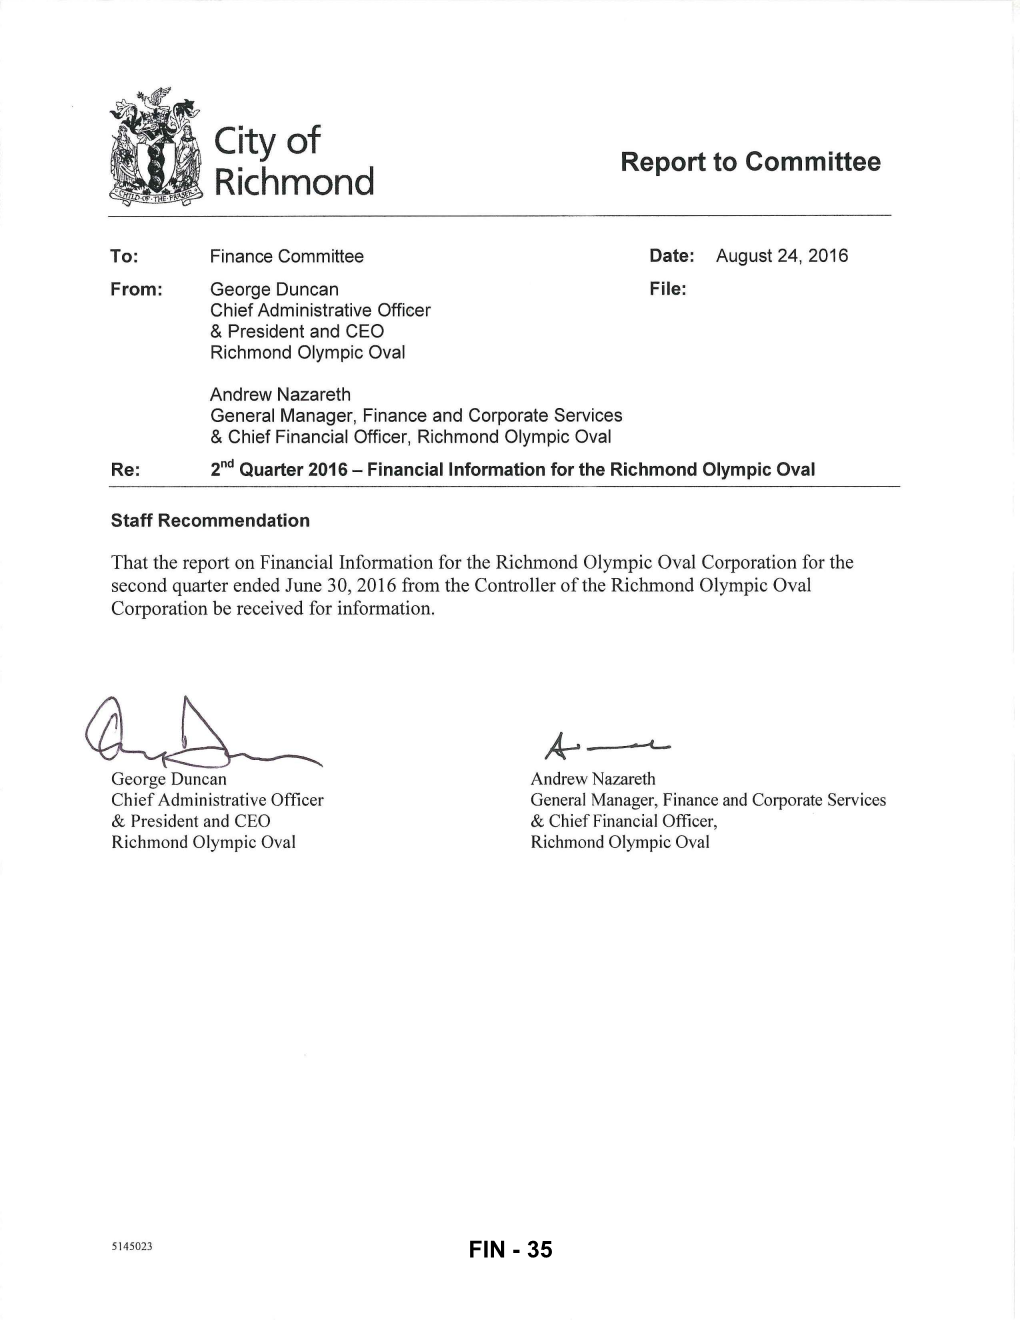 Financial Information for the Richmond Olympic Oval